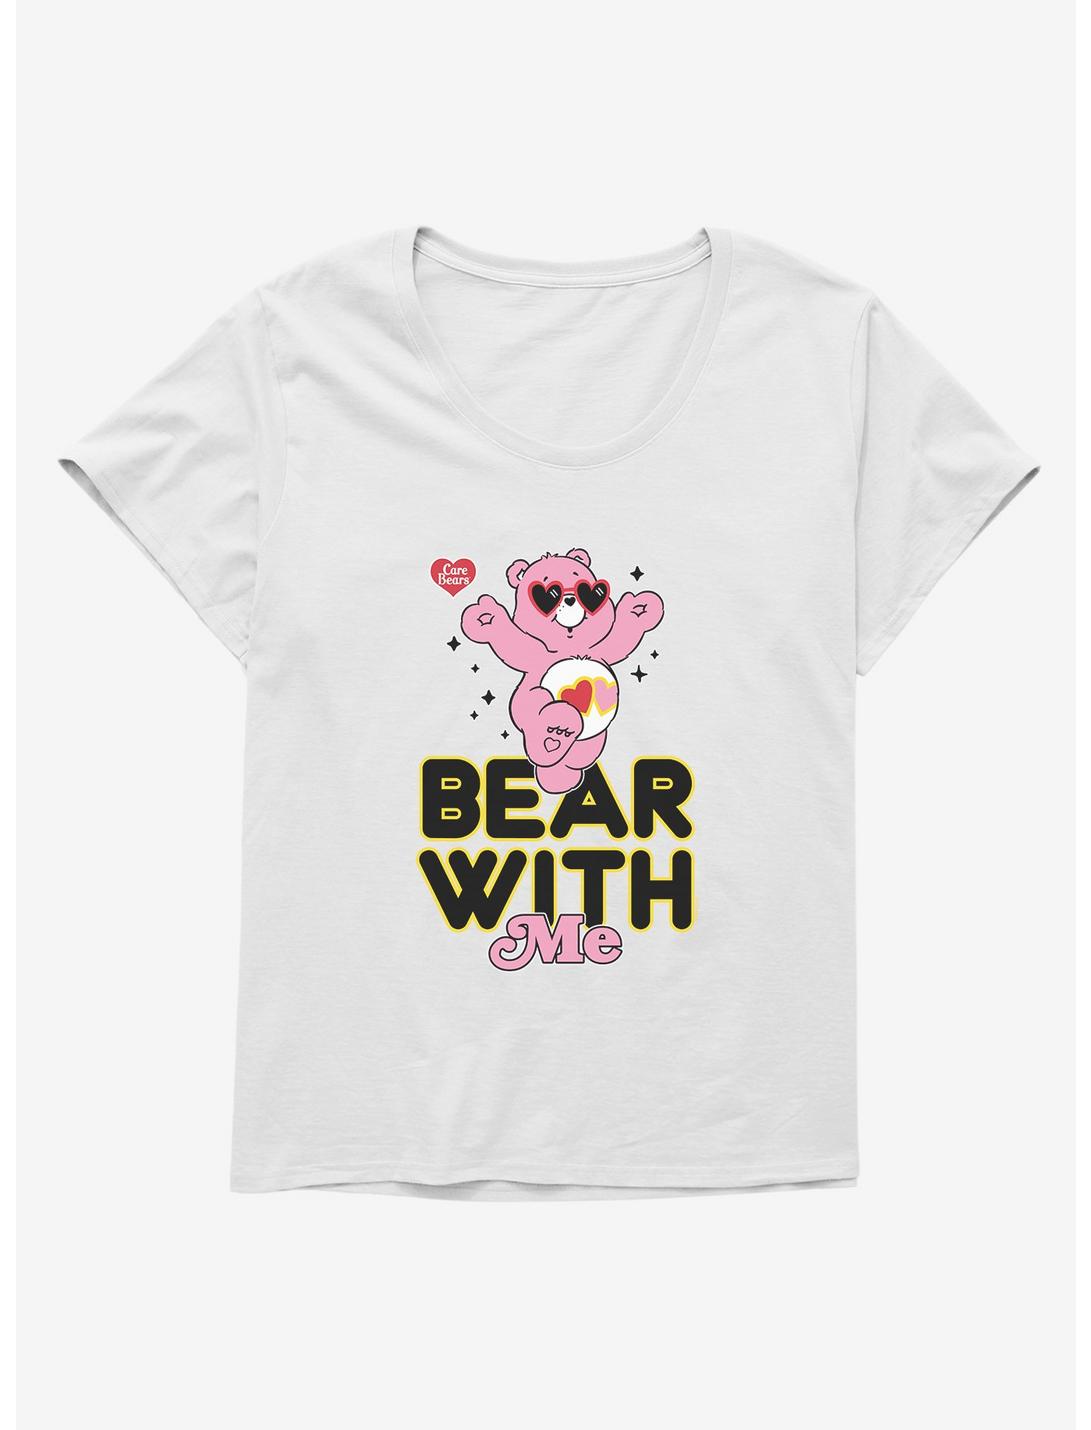 Care Bears Bear With Me Womens T-Shirt Plus Size